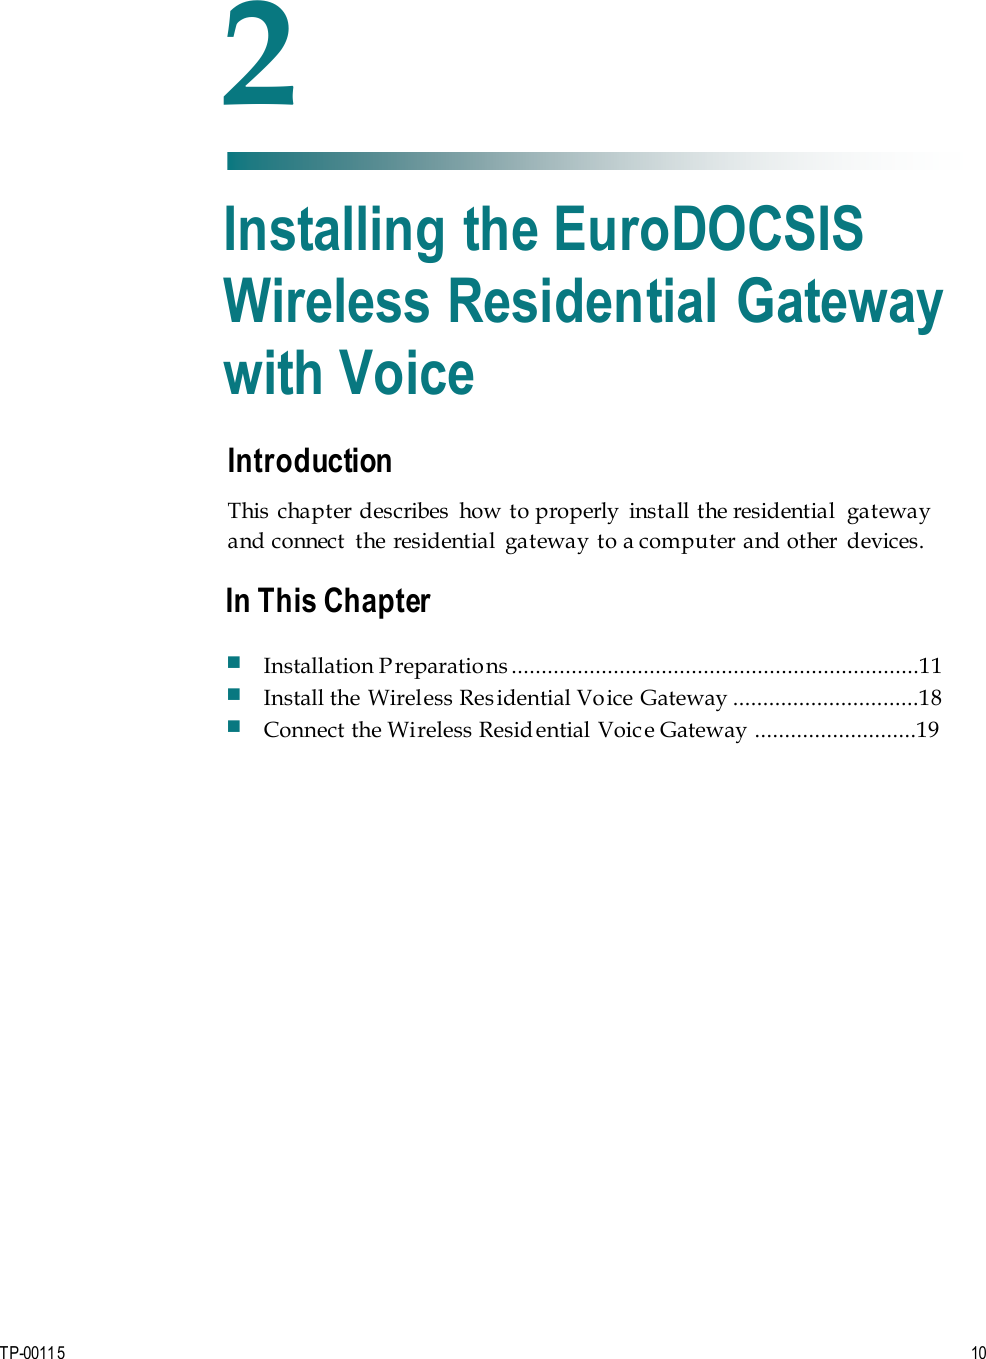 TP-00115  10 Introduction This chapter describes  how to properly  install  the residential  gateway and connect  the  residential  gateway to a computer and other  devices. 2 Chapter 2 Installing the EuroDOCSIS Wireless Residential Gateway with Voice In This Chapter Installation Preparations ....................................................................11 Install the Wireless Residential Voice Gateway ...............................18 Connect the Wireless Residential Voice Gateway ...........................19 